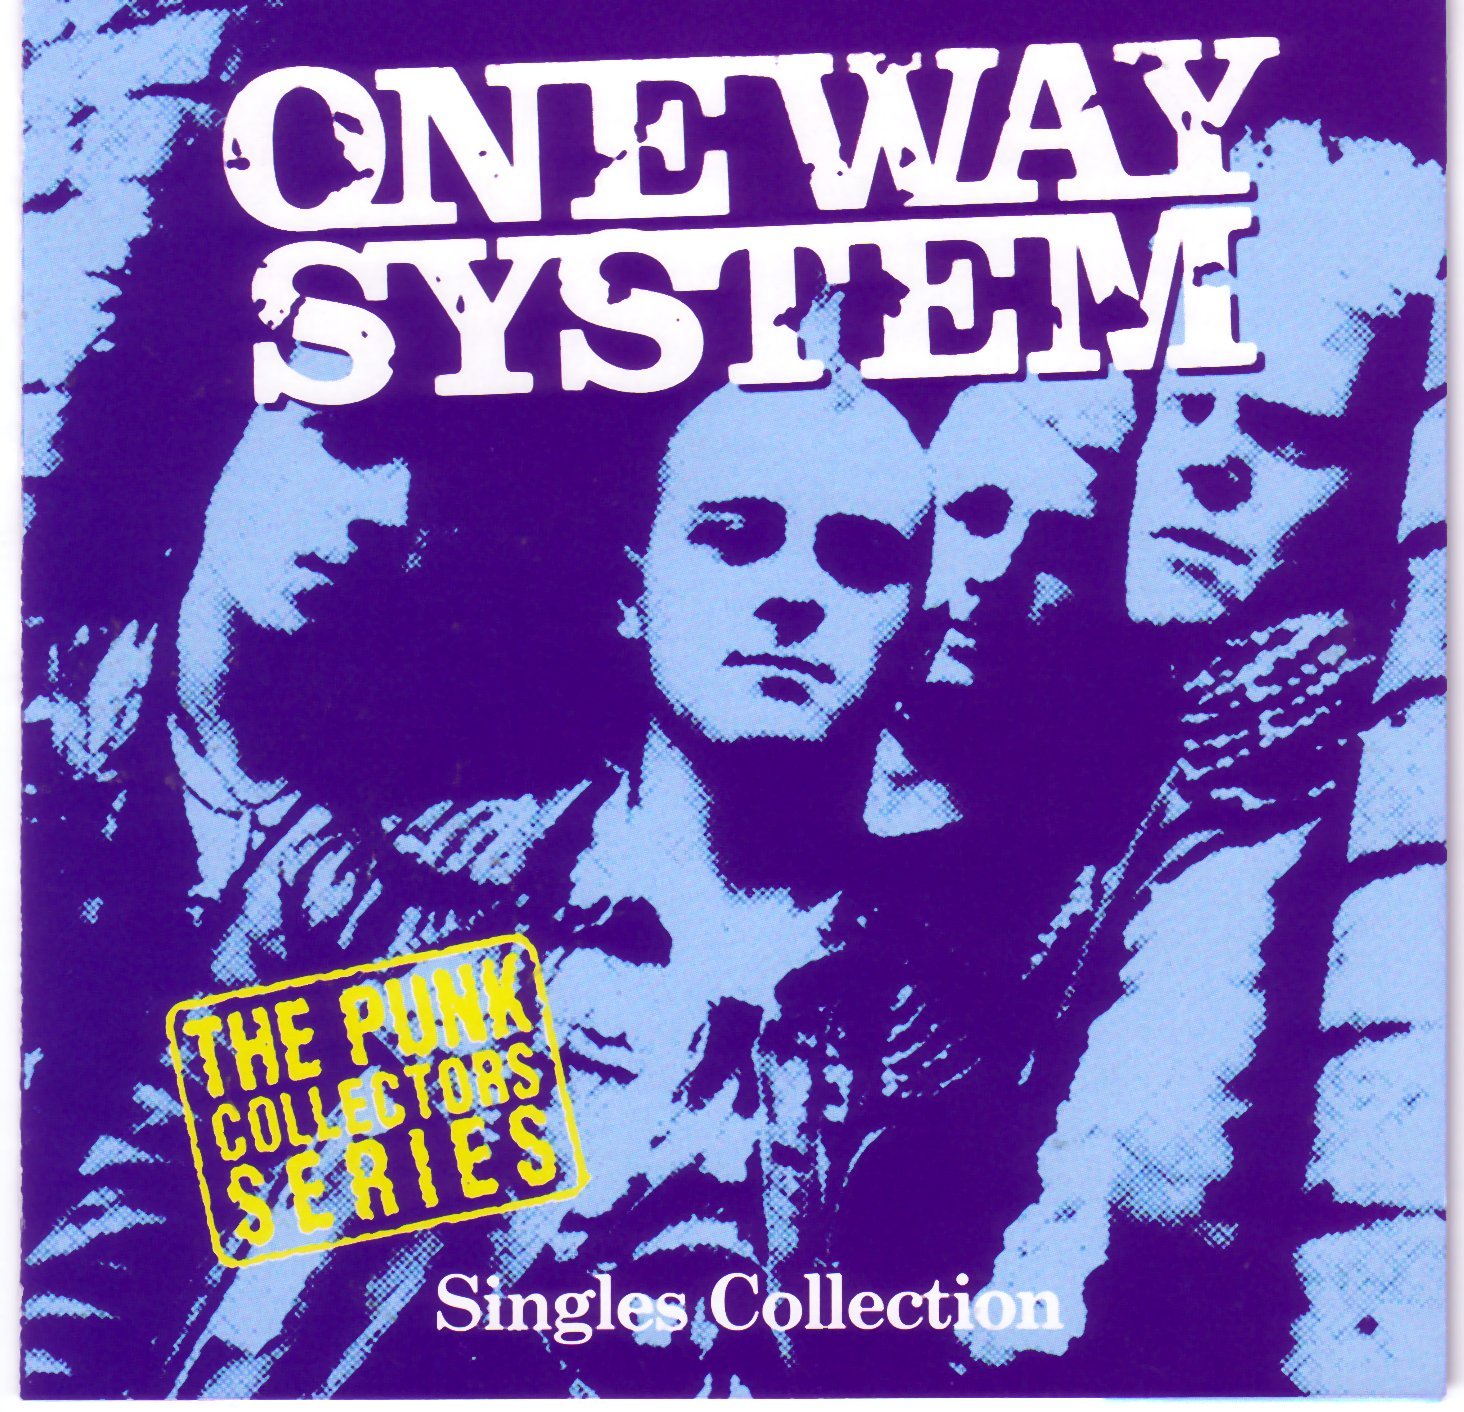 Feel the noise. One way System Punk. One way System группа. One way System обложка. One way Street обложки альбомов.